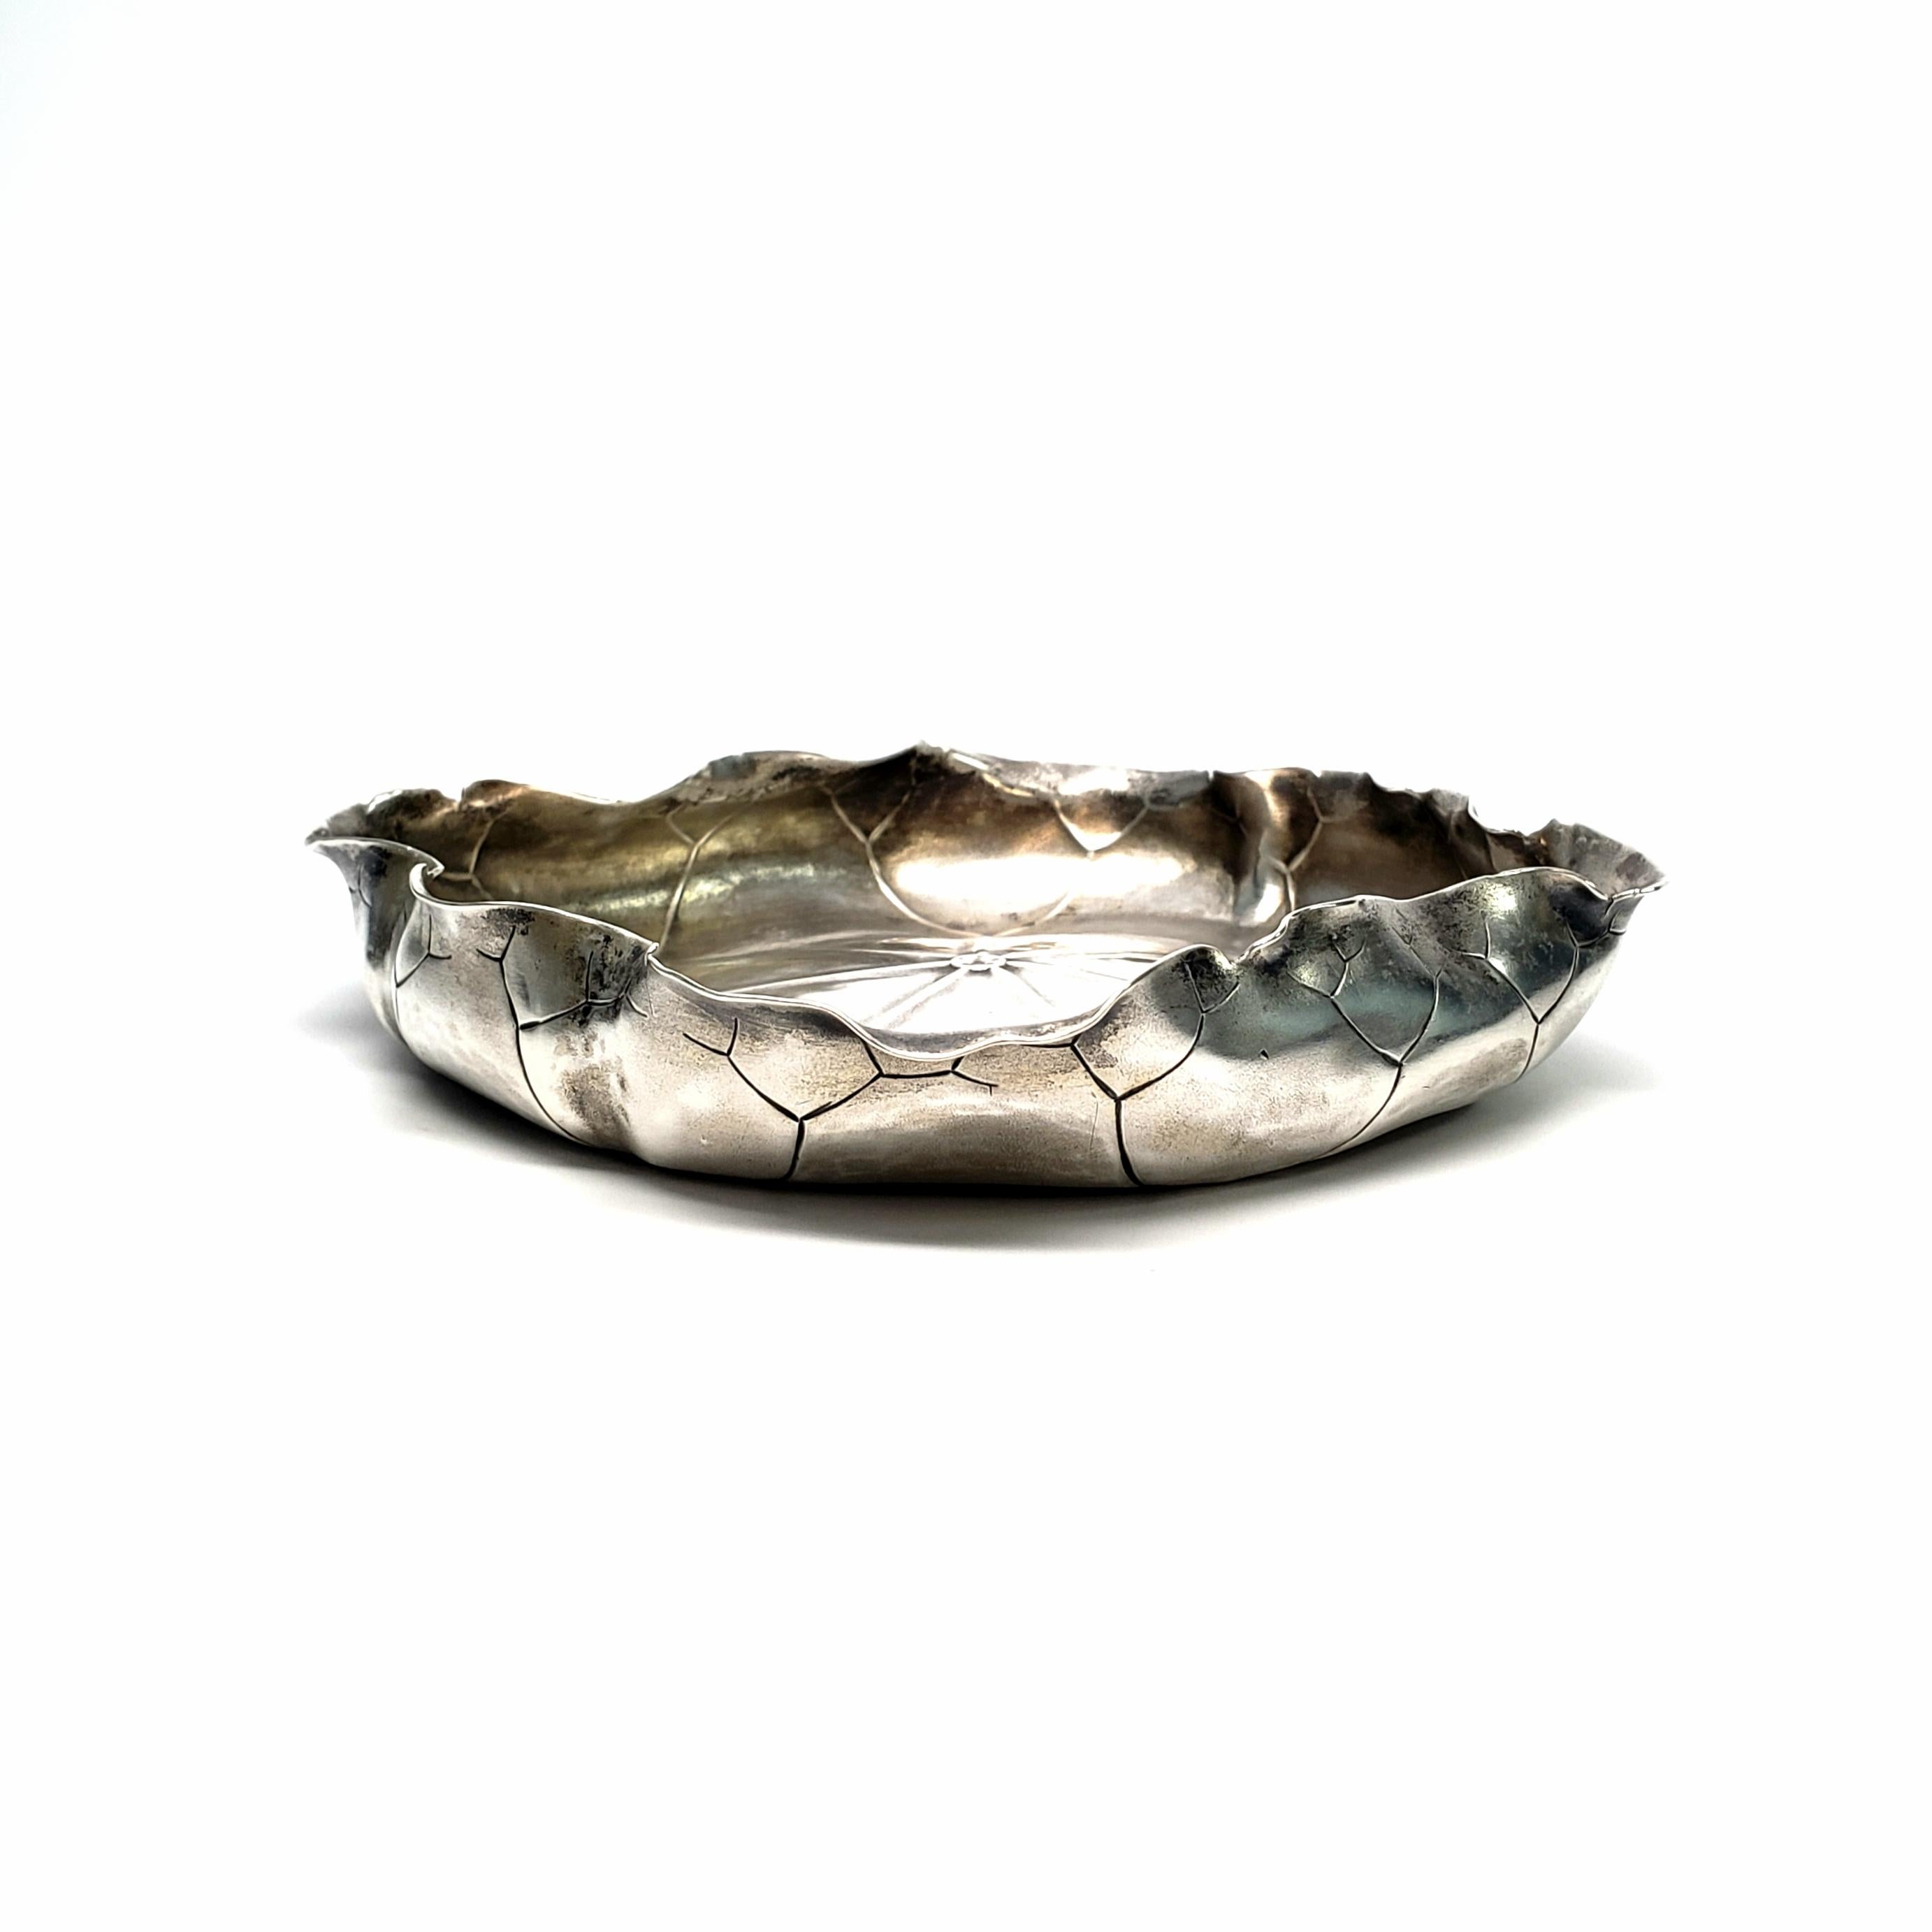 20th Century George W Shiebler & Co Sterling Silver Lily Pad Bowl For Sale